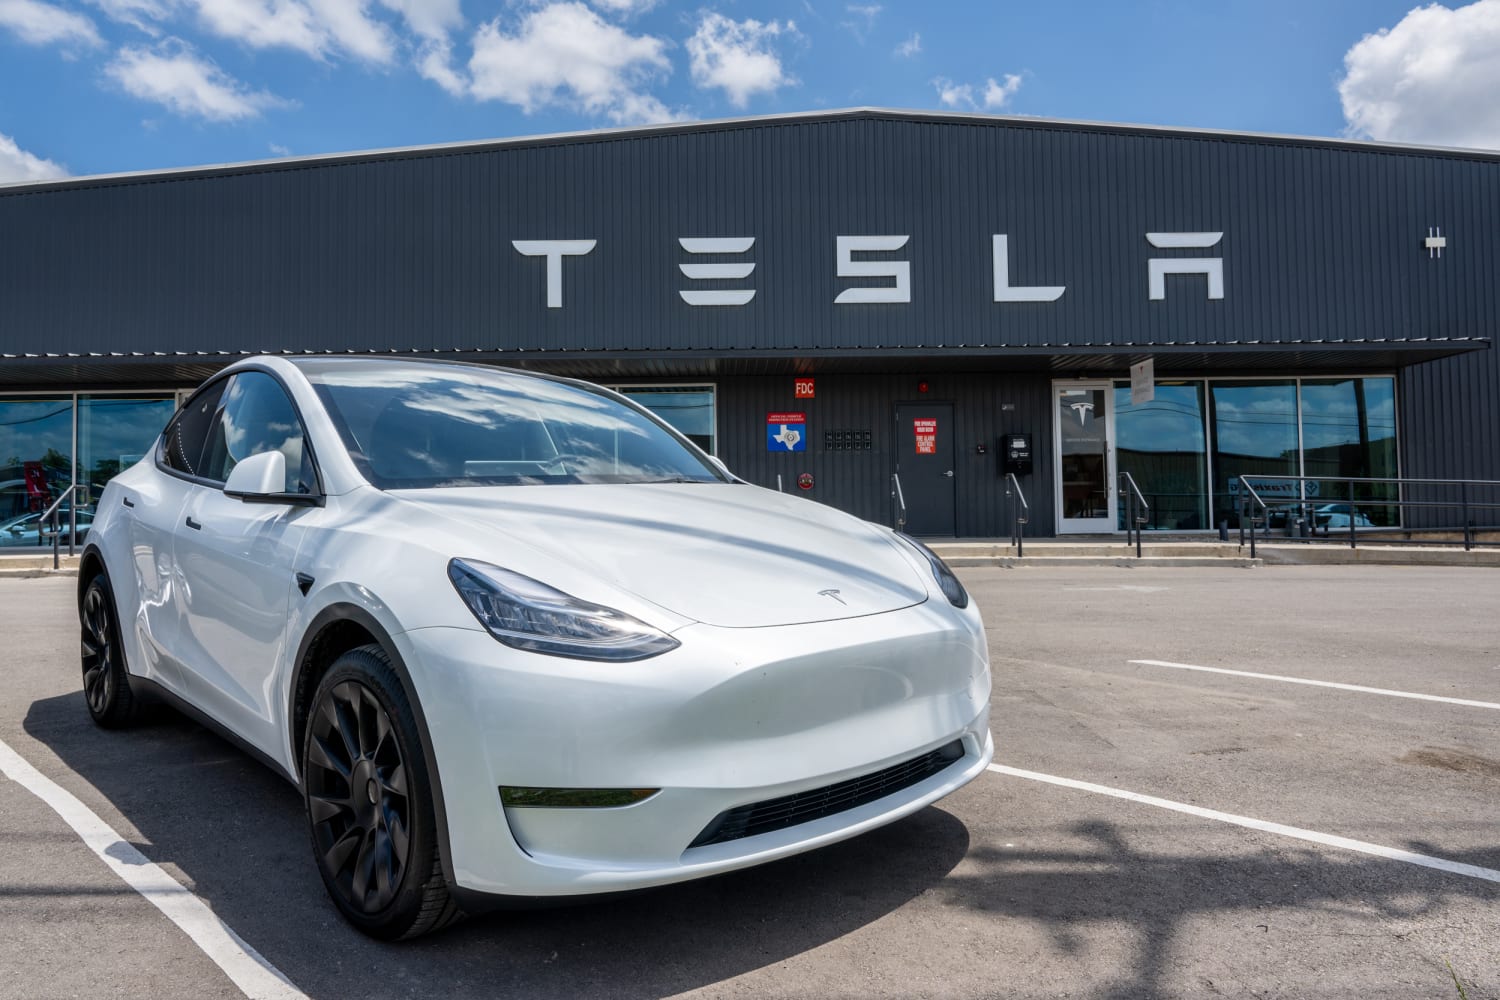 Tesla's lower prices lead to record global deliveries